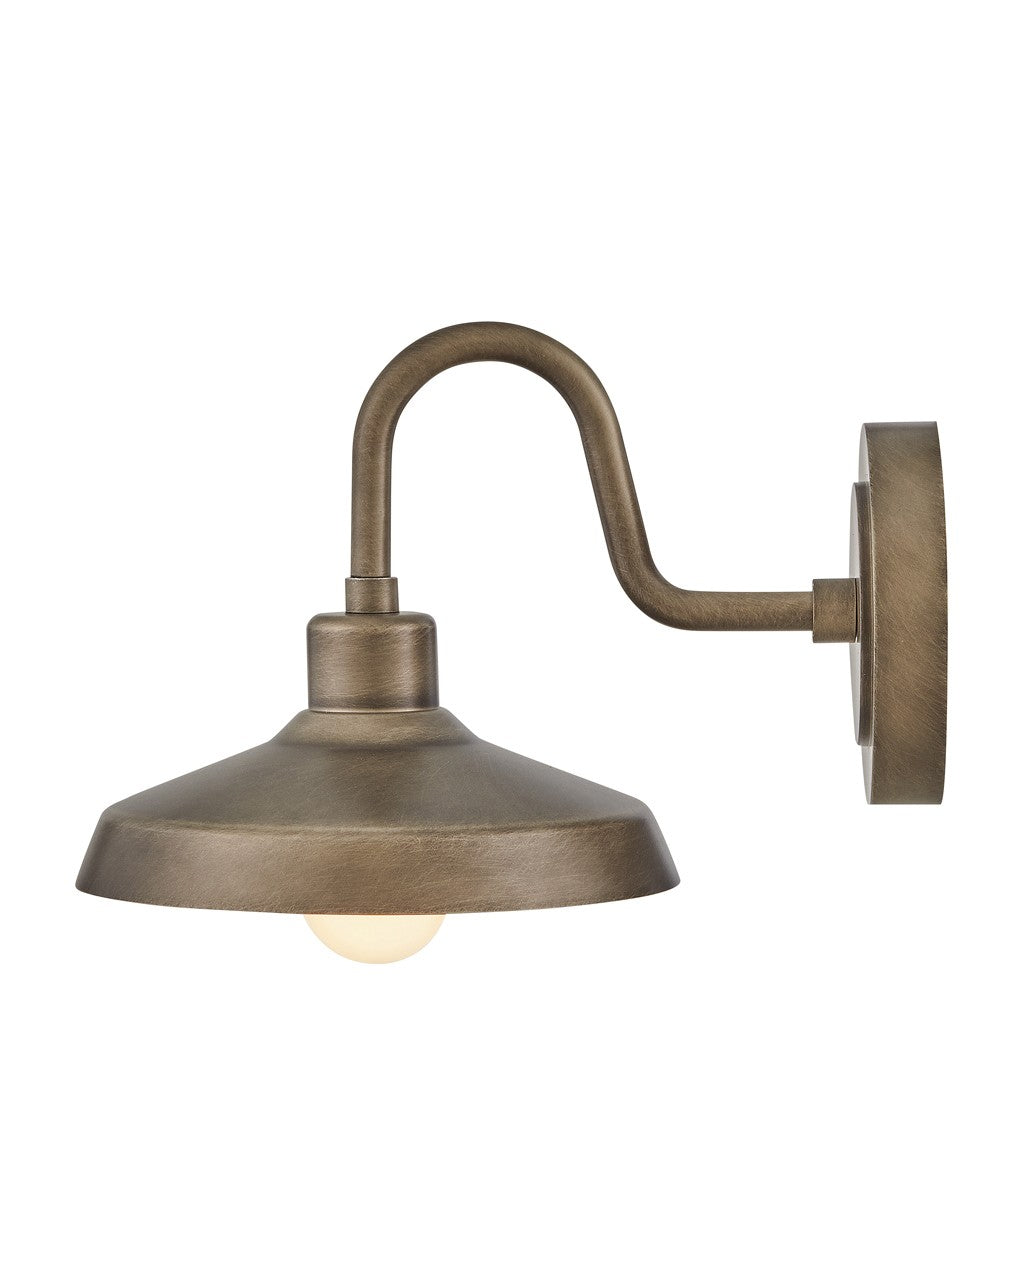 Forge LED Wall Mount Lantern in Burnished Bronze by Hinkley Lighting